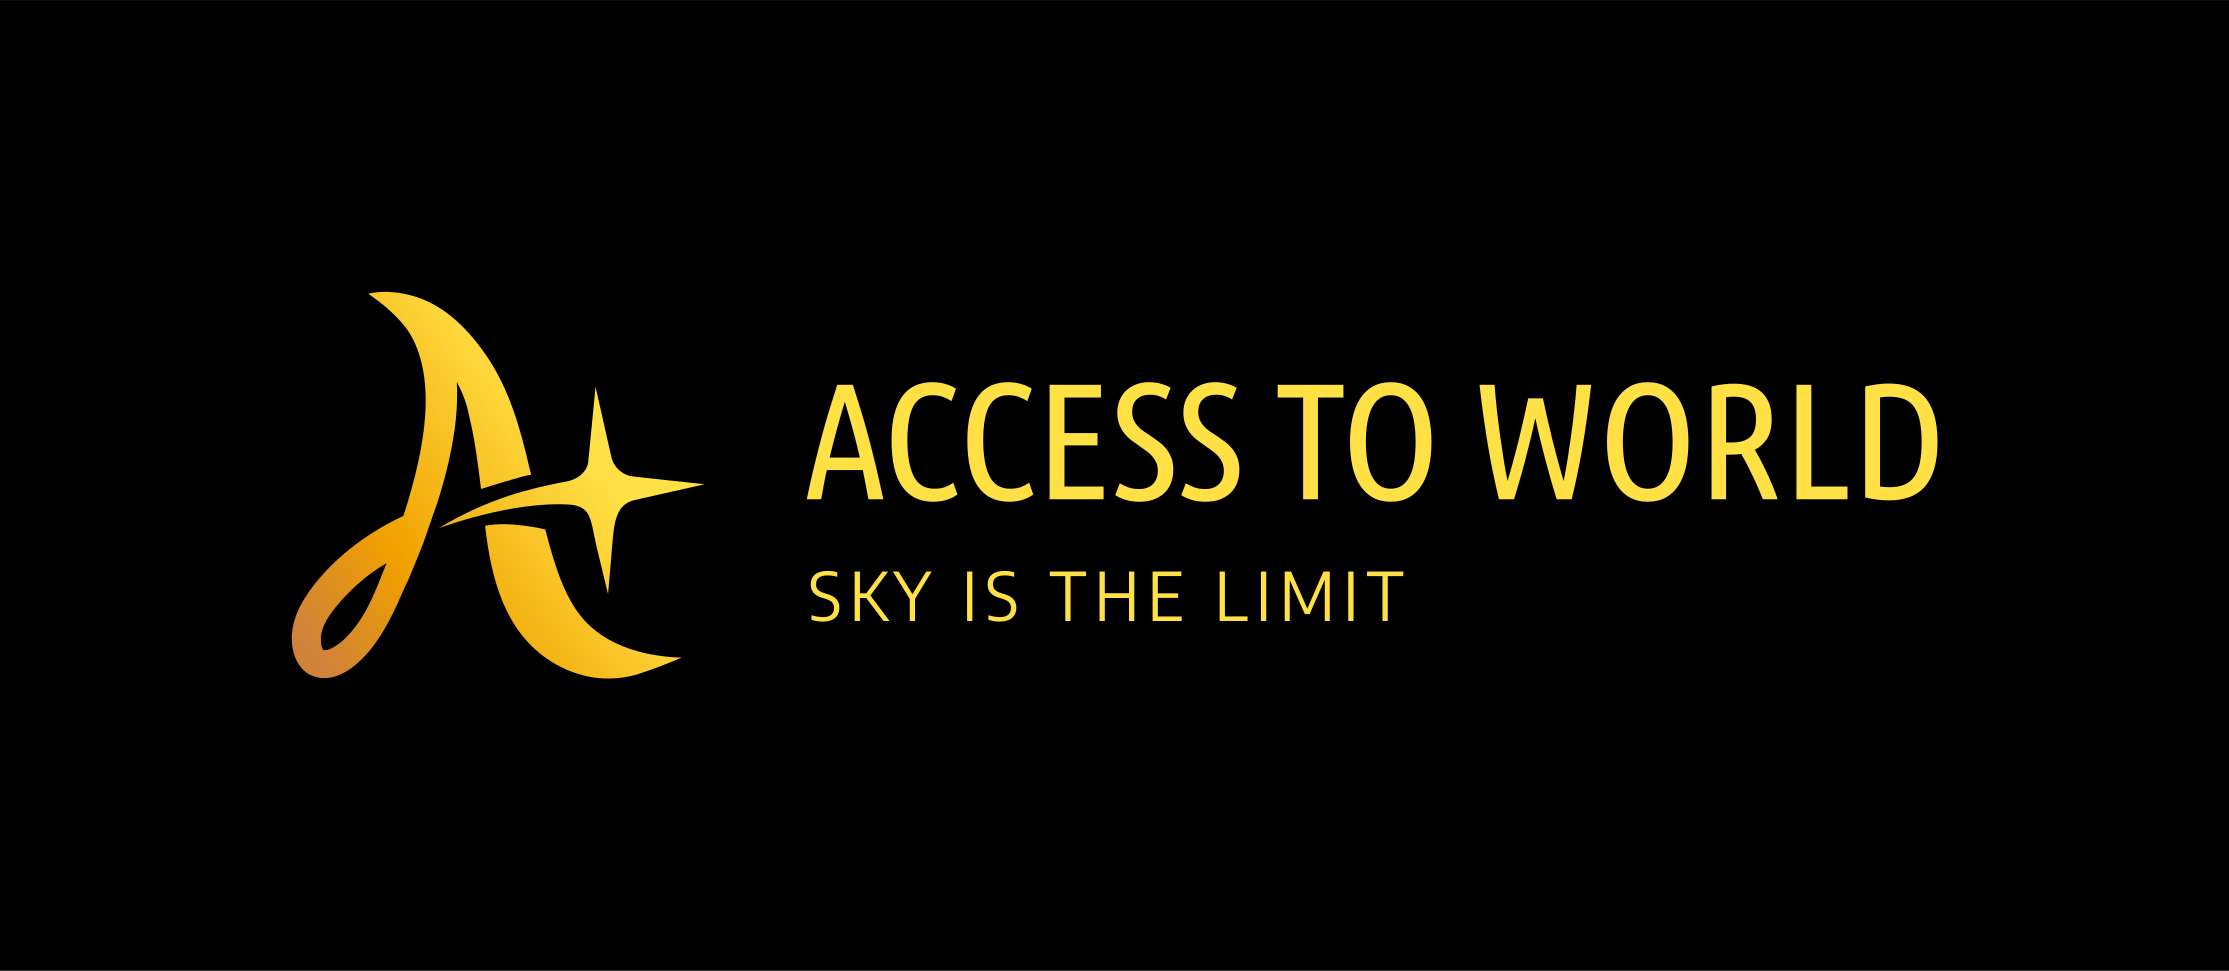 Access To World